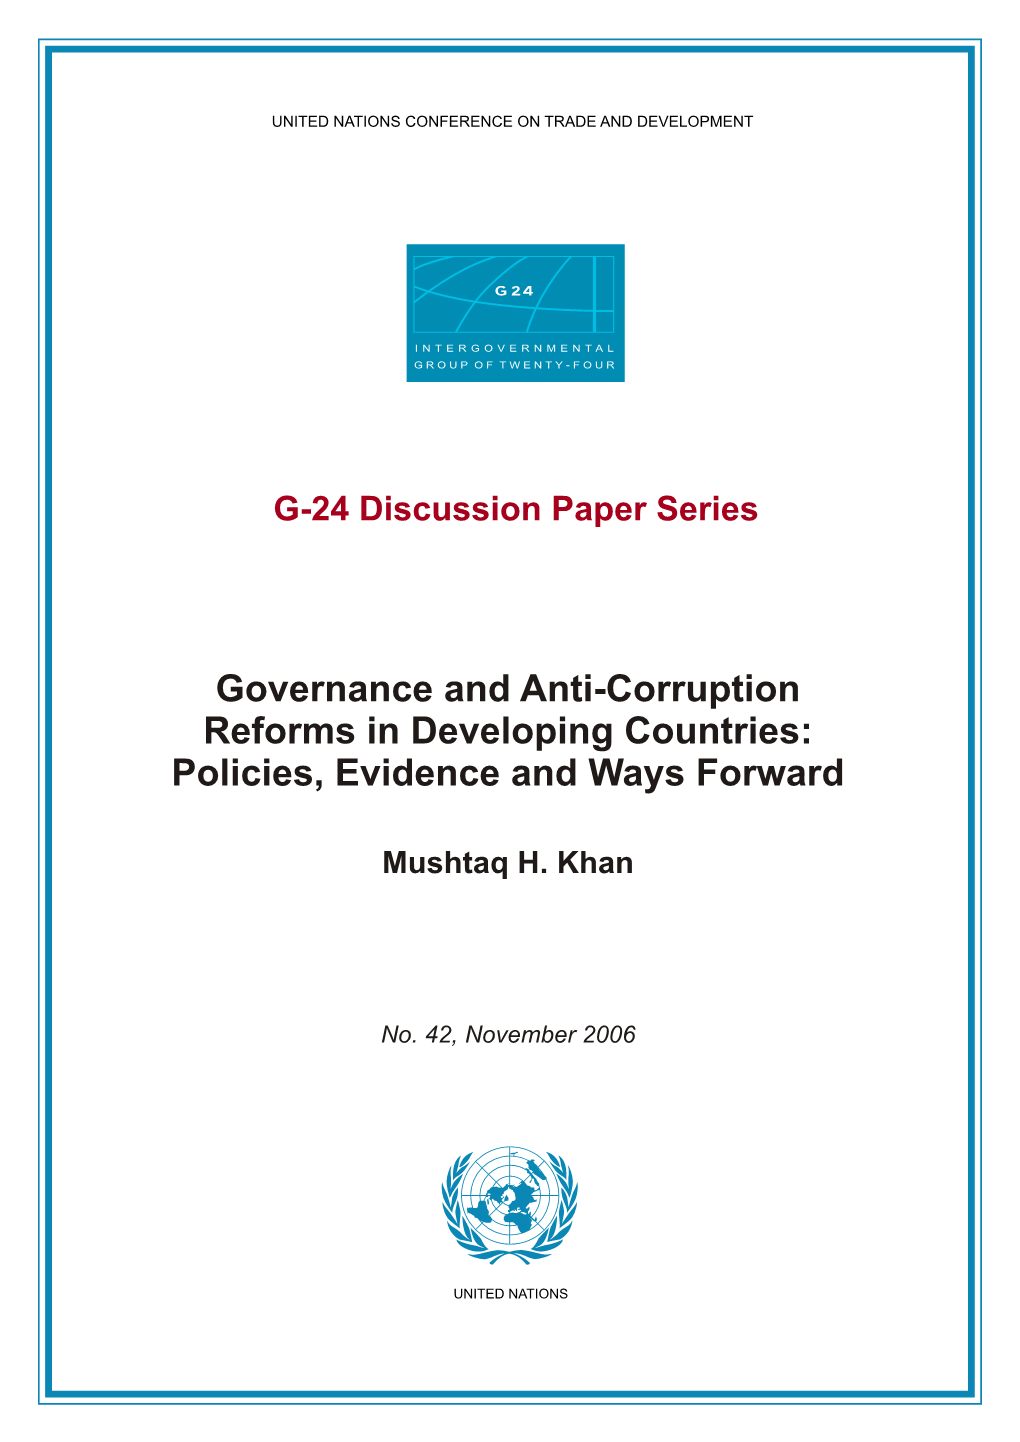 Governance and Anti-Corruption Reforms in Developing Countries: Policies, Evidence and Ways Forward